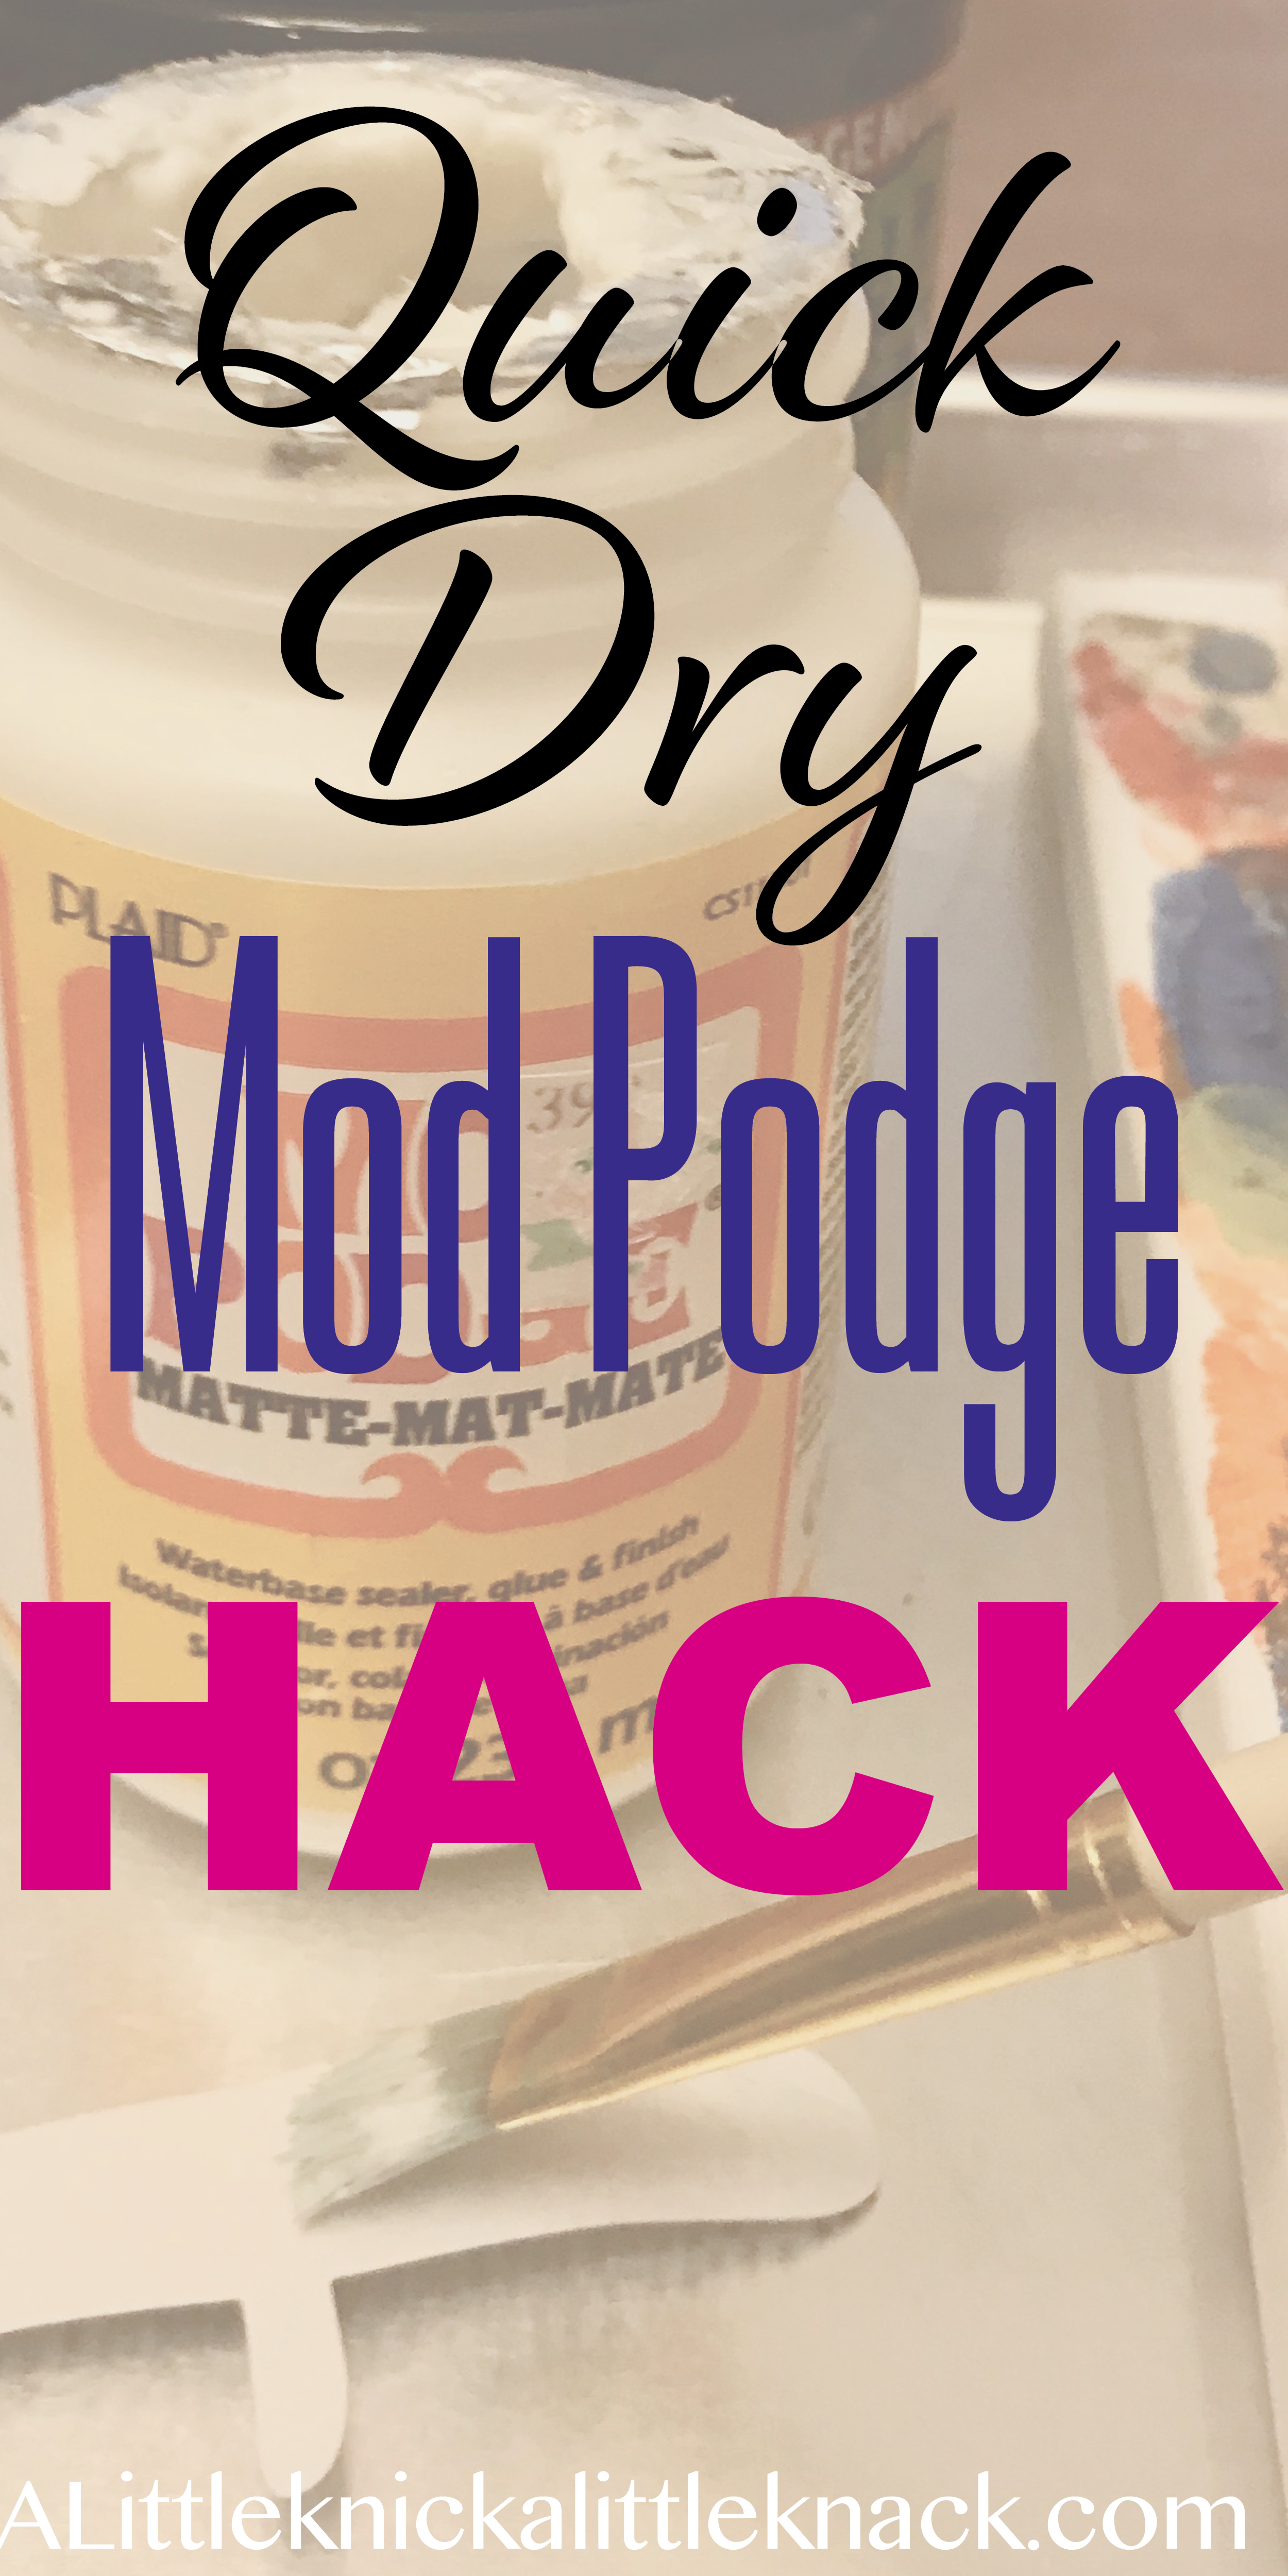 Try These AMAZING MOD PODGE HACKS on Your Next DIY